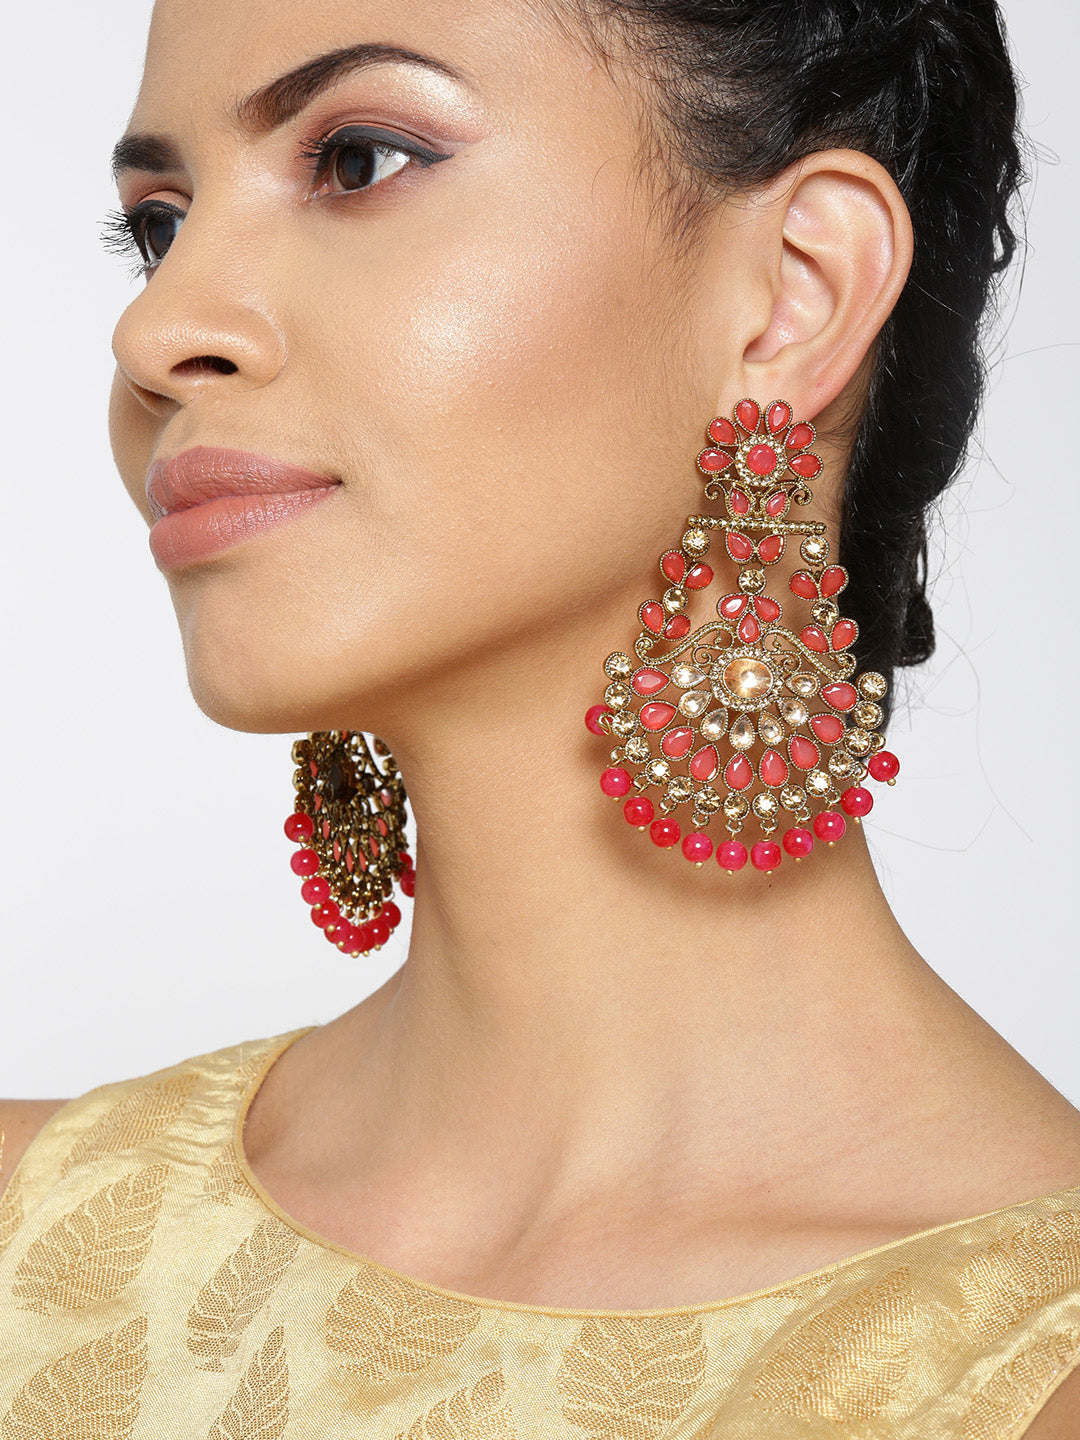 Gold-Plated Pink Stones Studded Drop Earrings